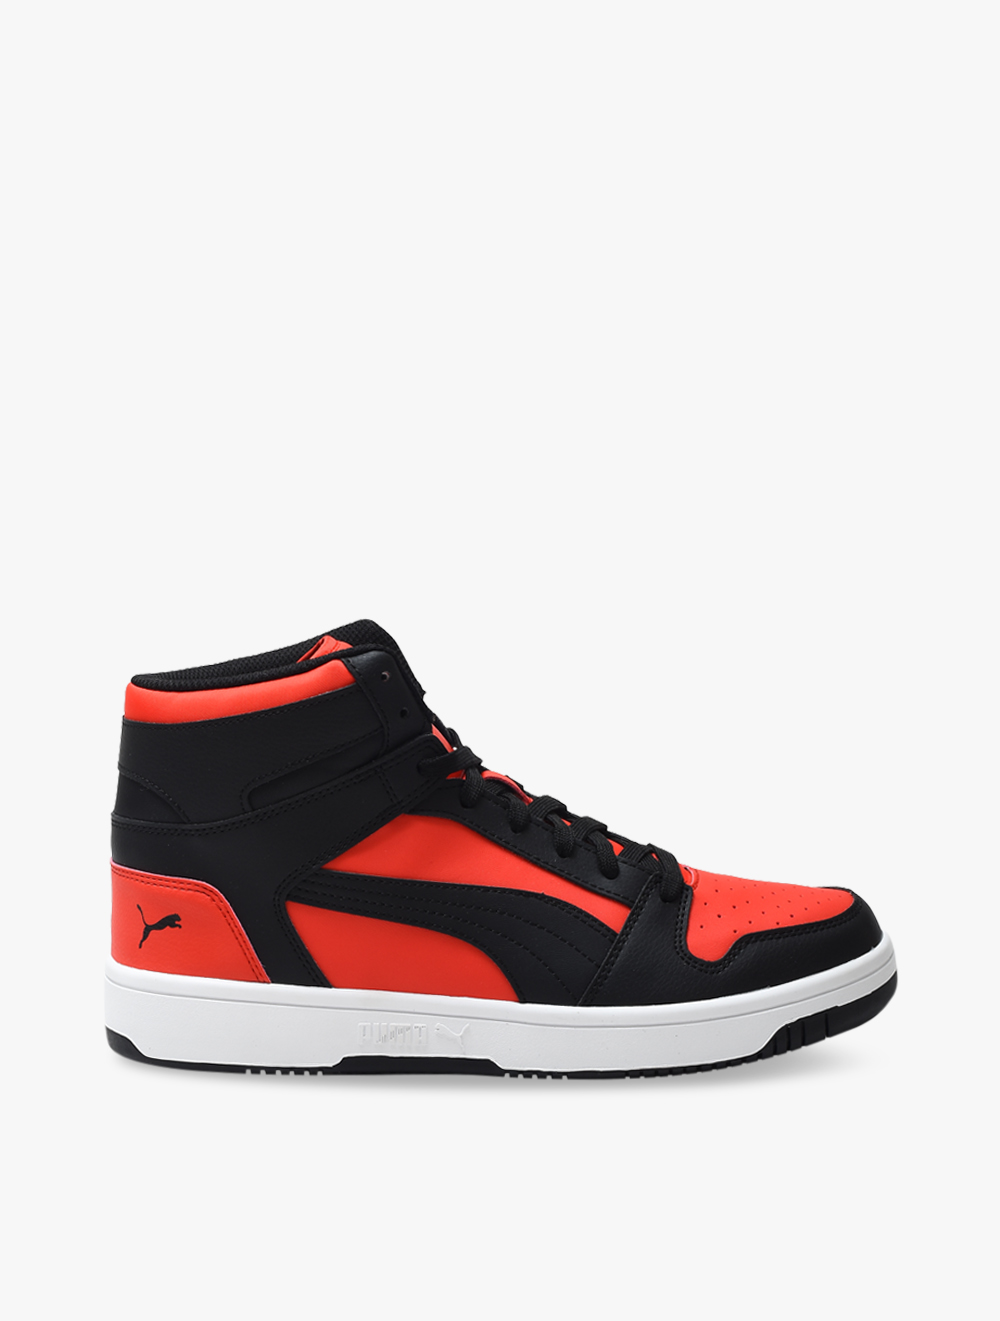 puma sneakers red and black